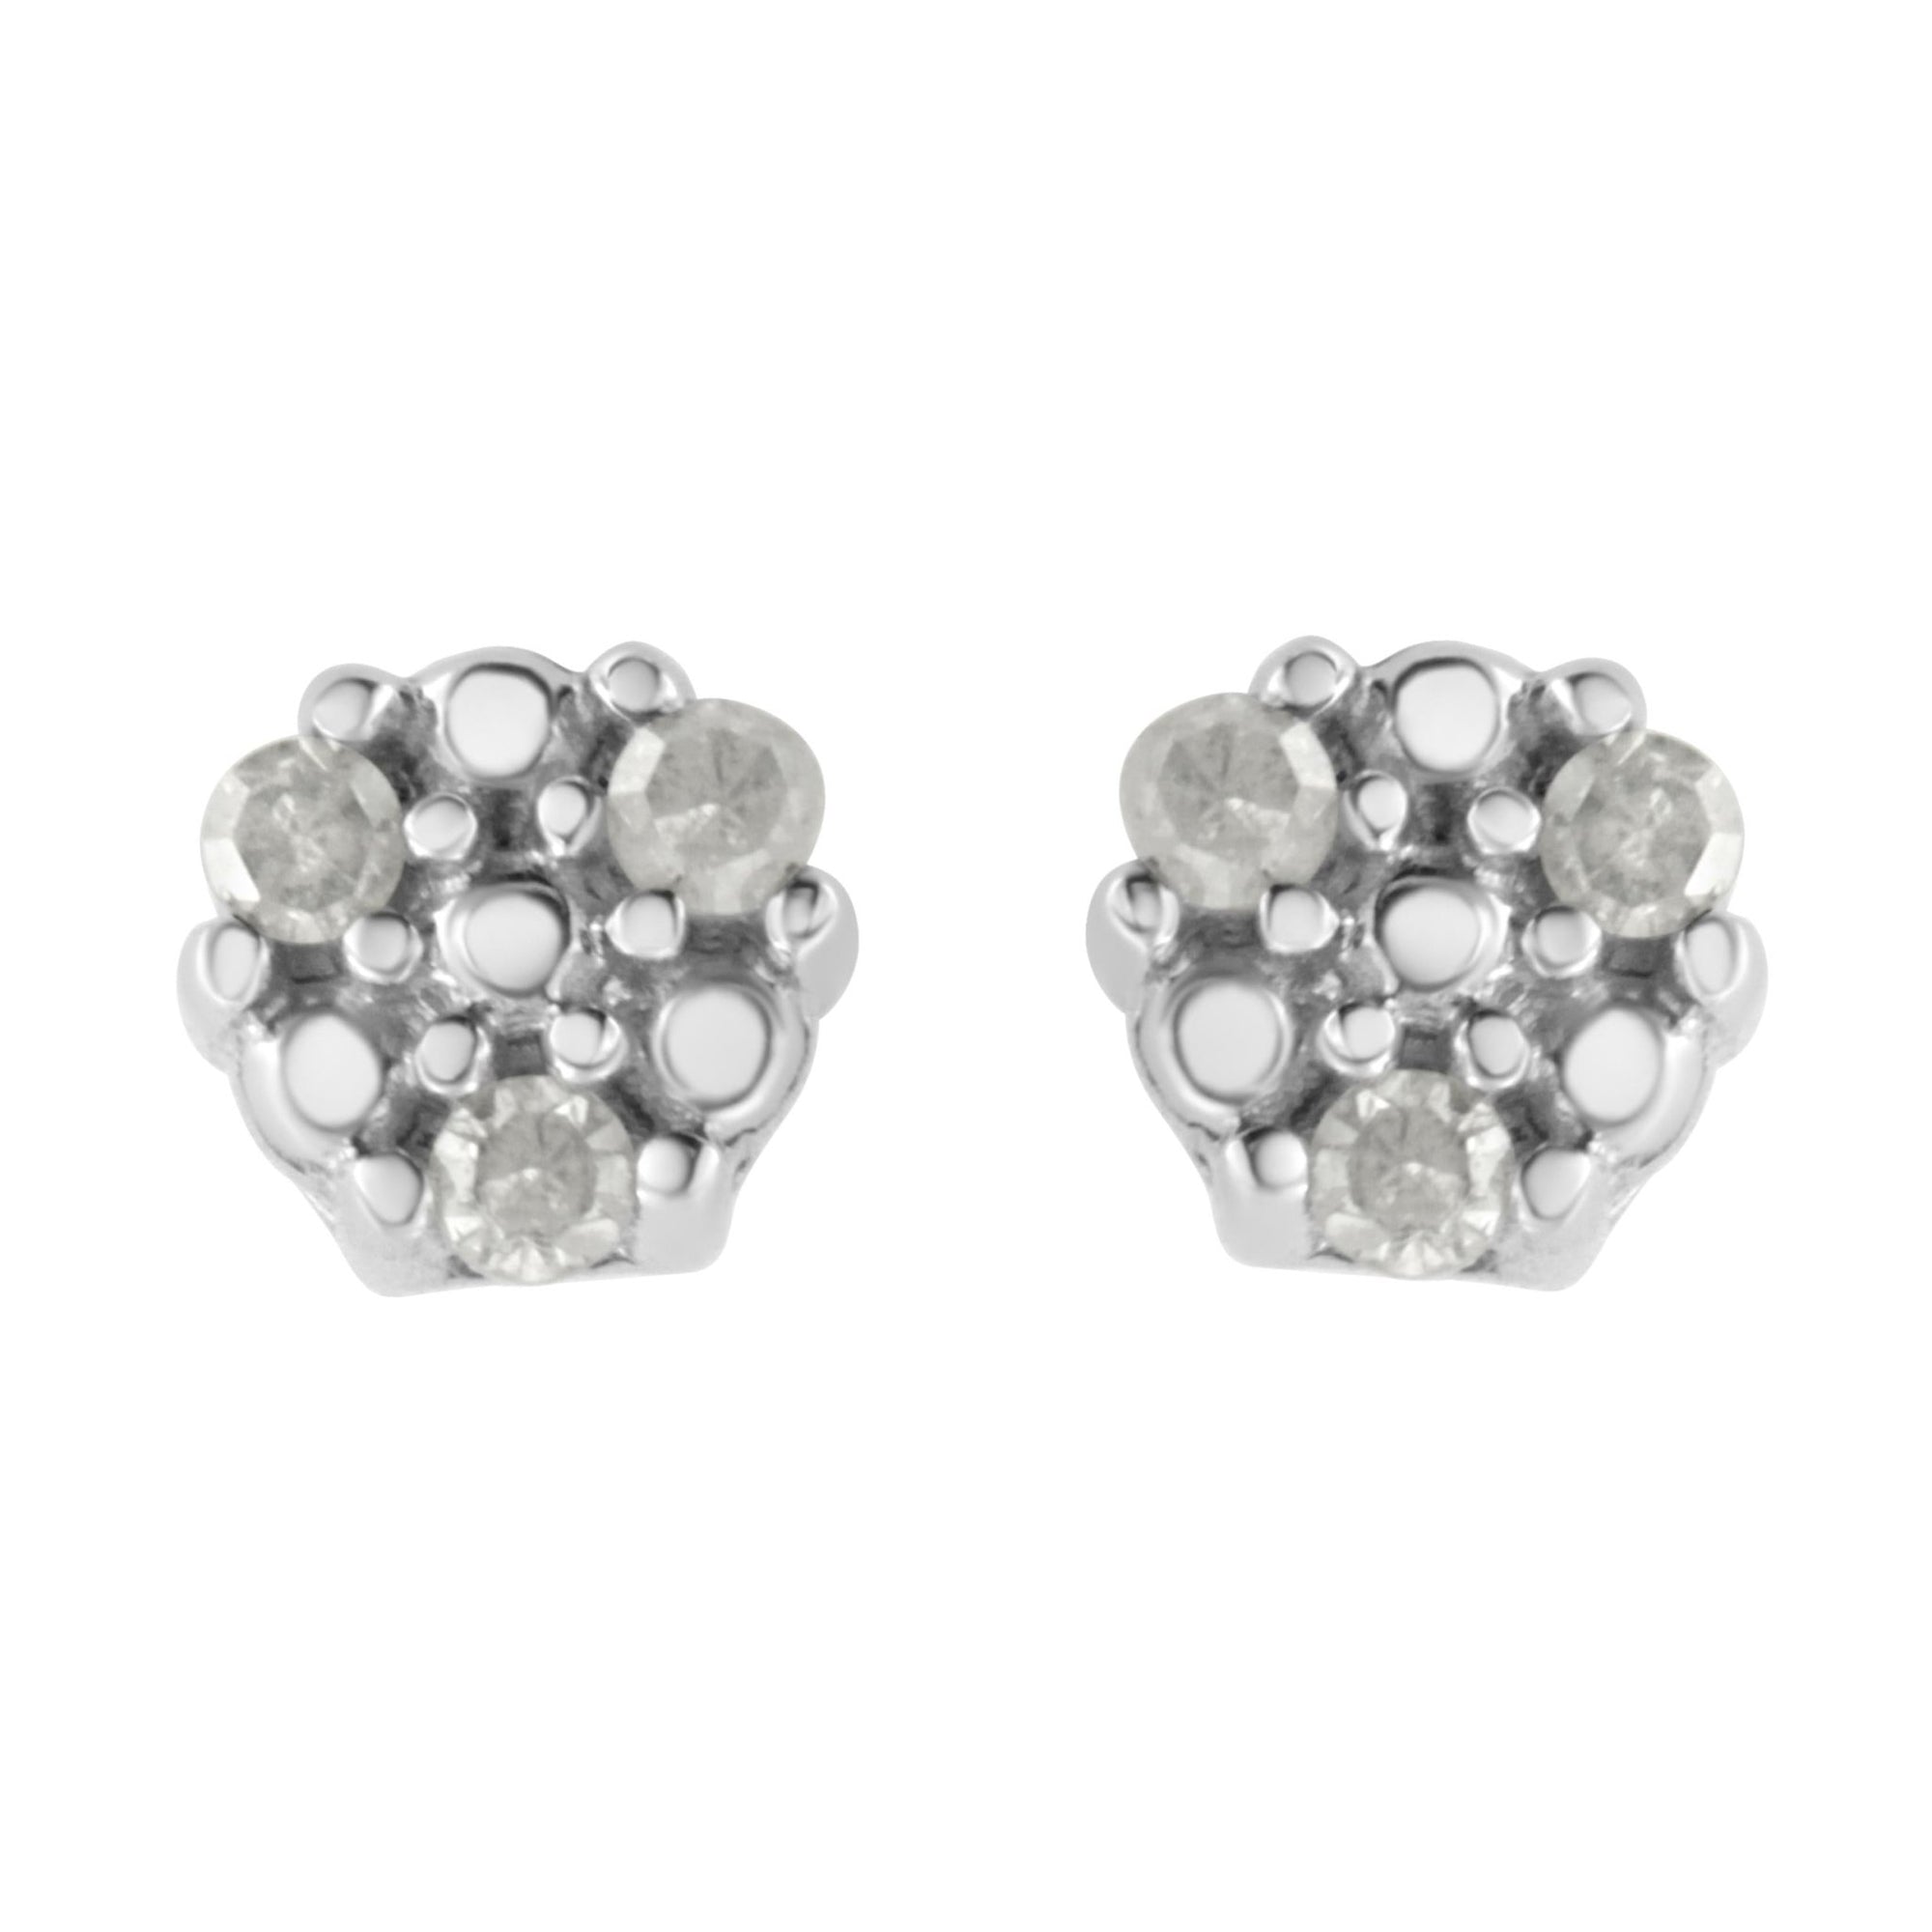 .925 Sterling Silver 1/10 cttw Prong Set Round-Cut Trio Diamond Stud Earrings (I-J Color, I3 Clarity) - LinkagejewelrydesignLinkagejewelrydesign